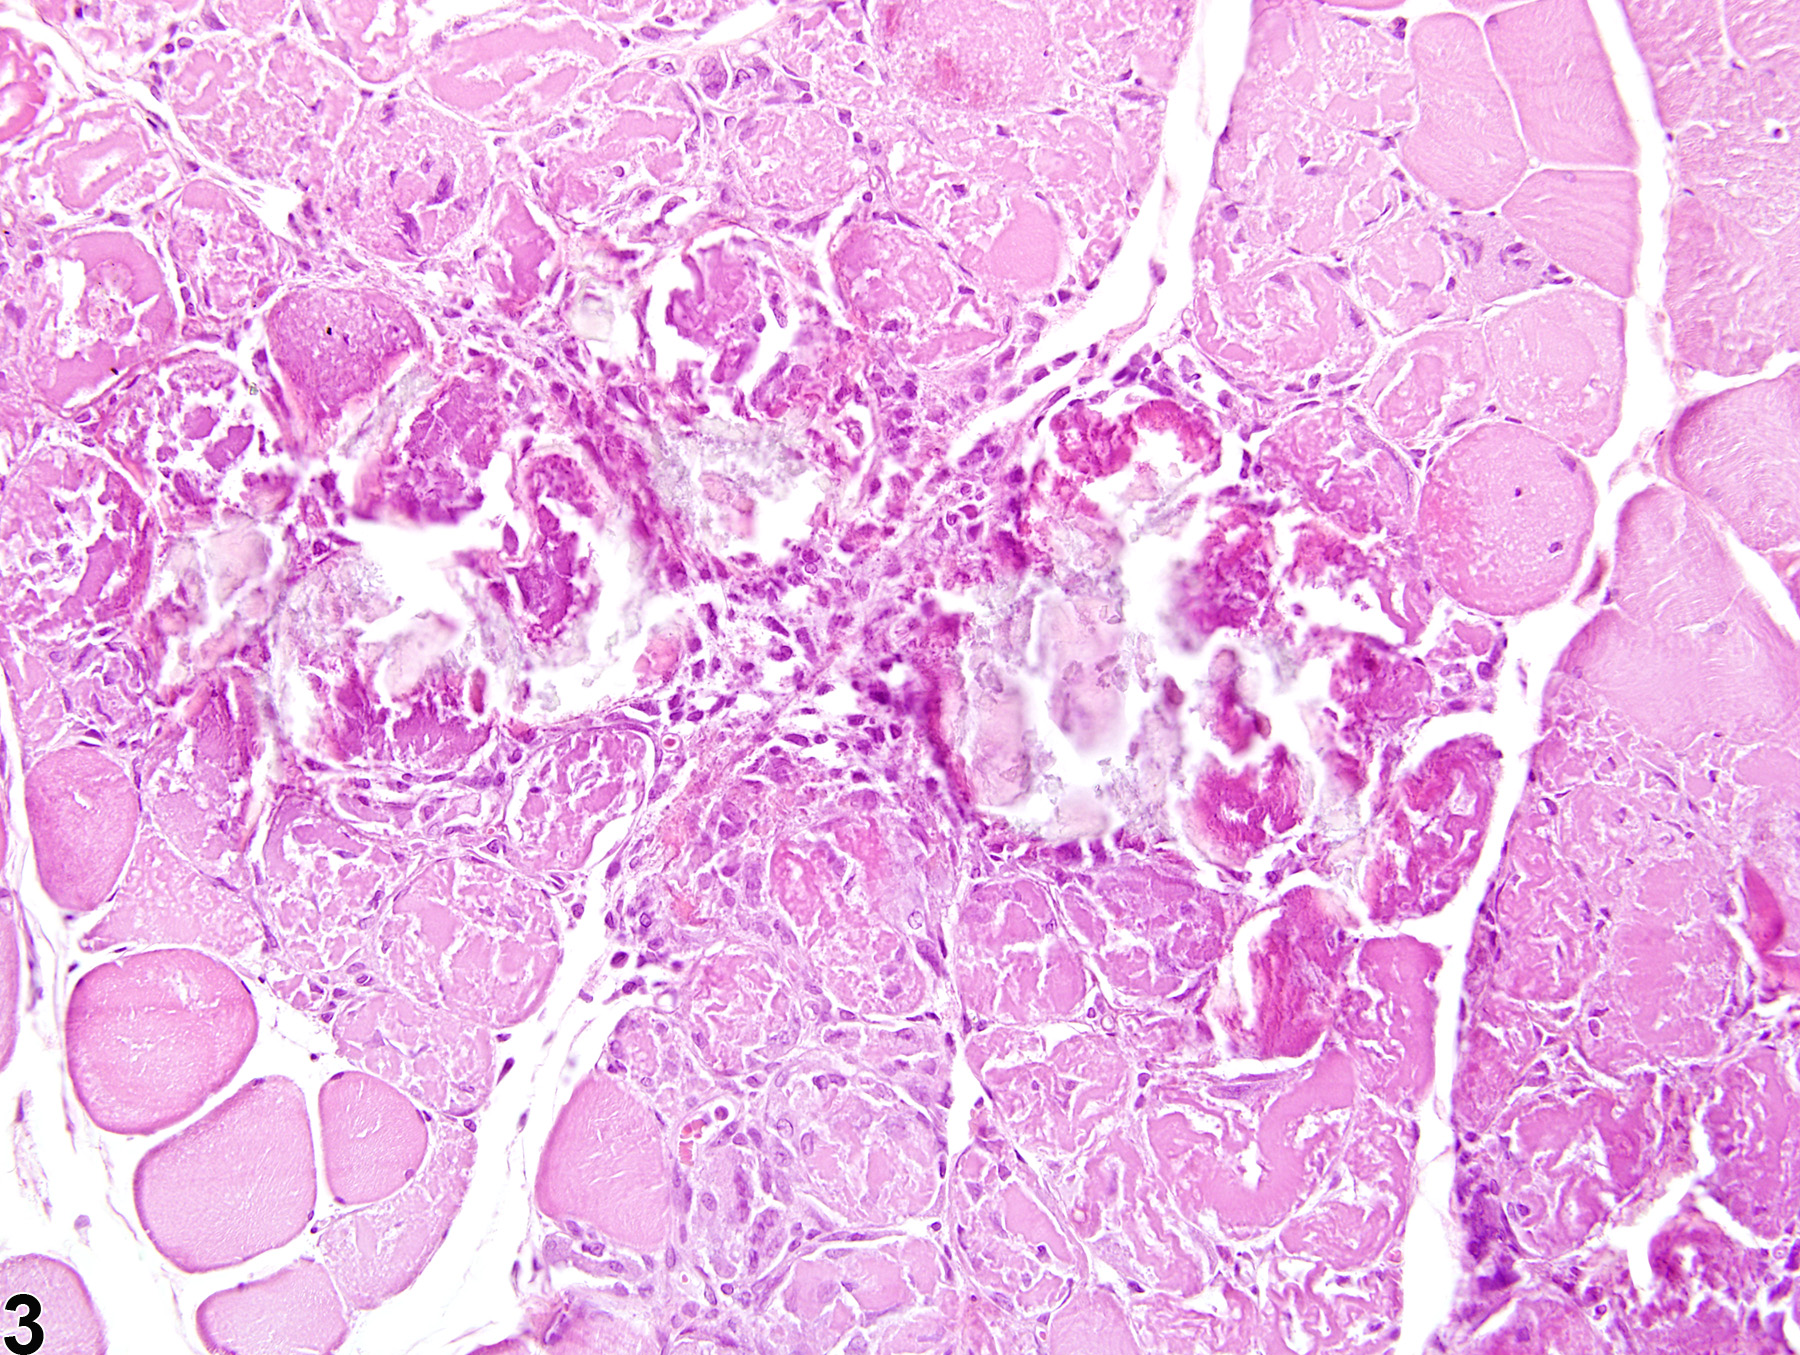 Image of necrosis in the skeletal muscle from a male F344/N rat in a chronic study